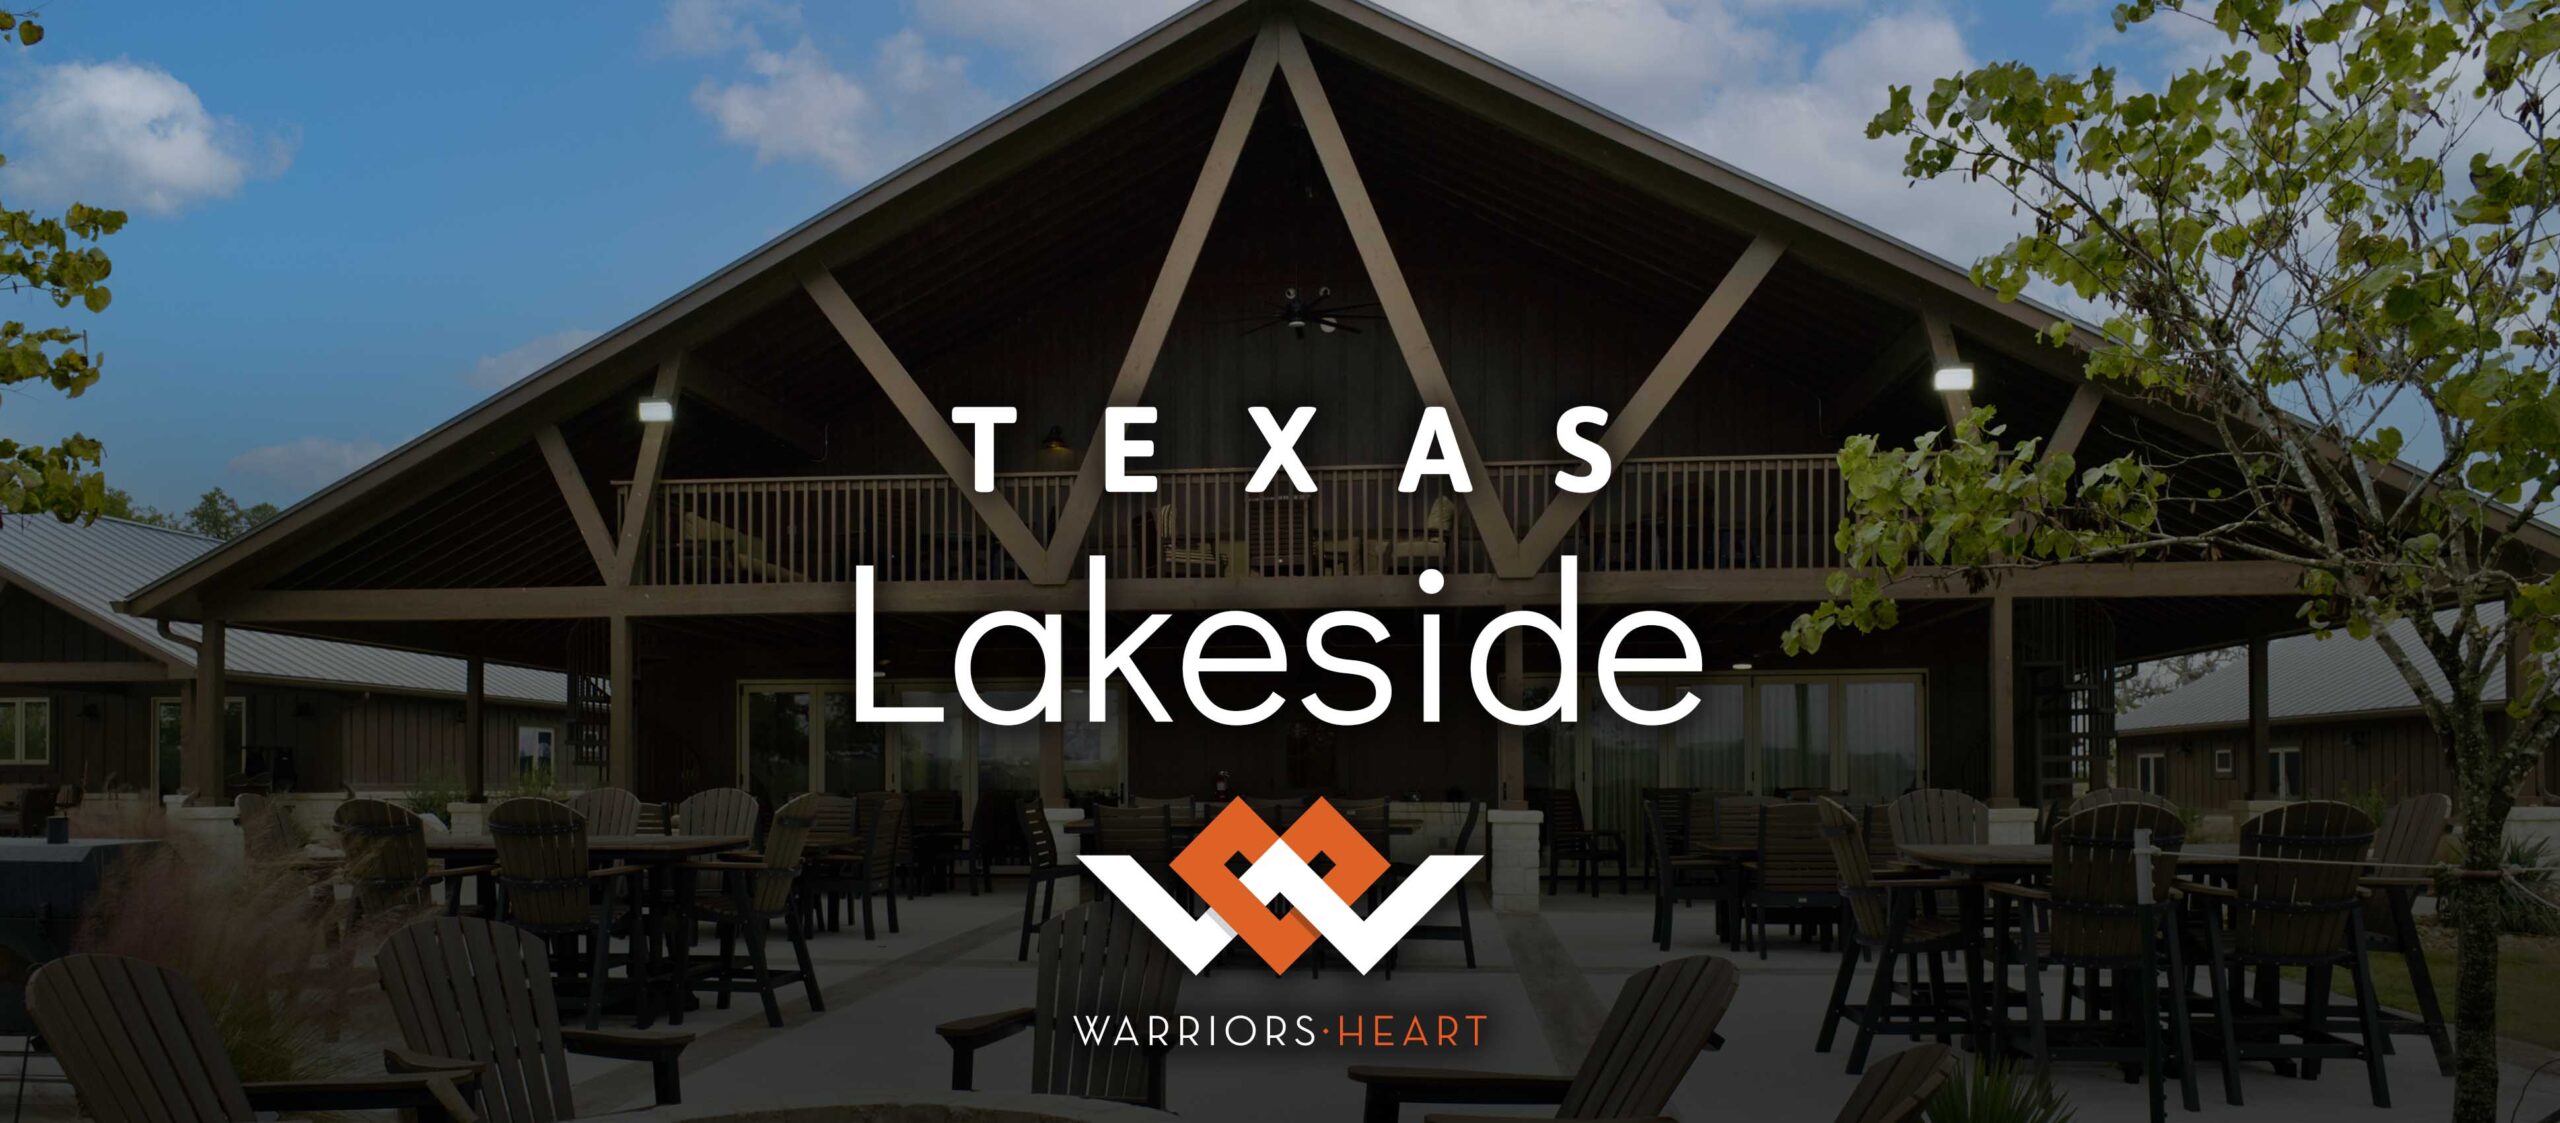 Warriors Heart in Bandera, Texas - Lakeside - Warriors Heart is an addiction and PTSD treatment center for active military, veterans, and first responders. Contact us today at (844) 448-2567.